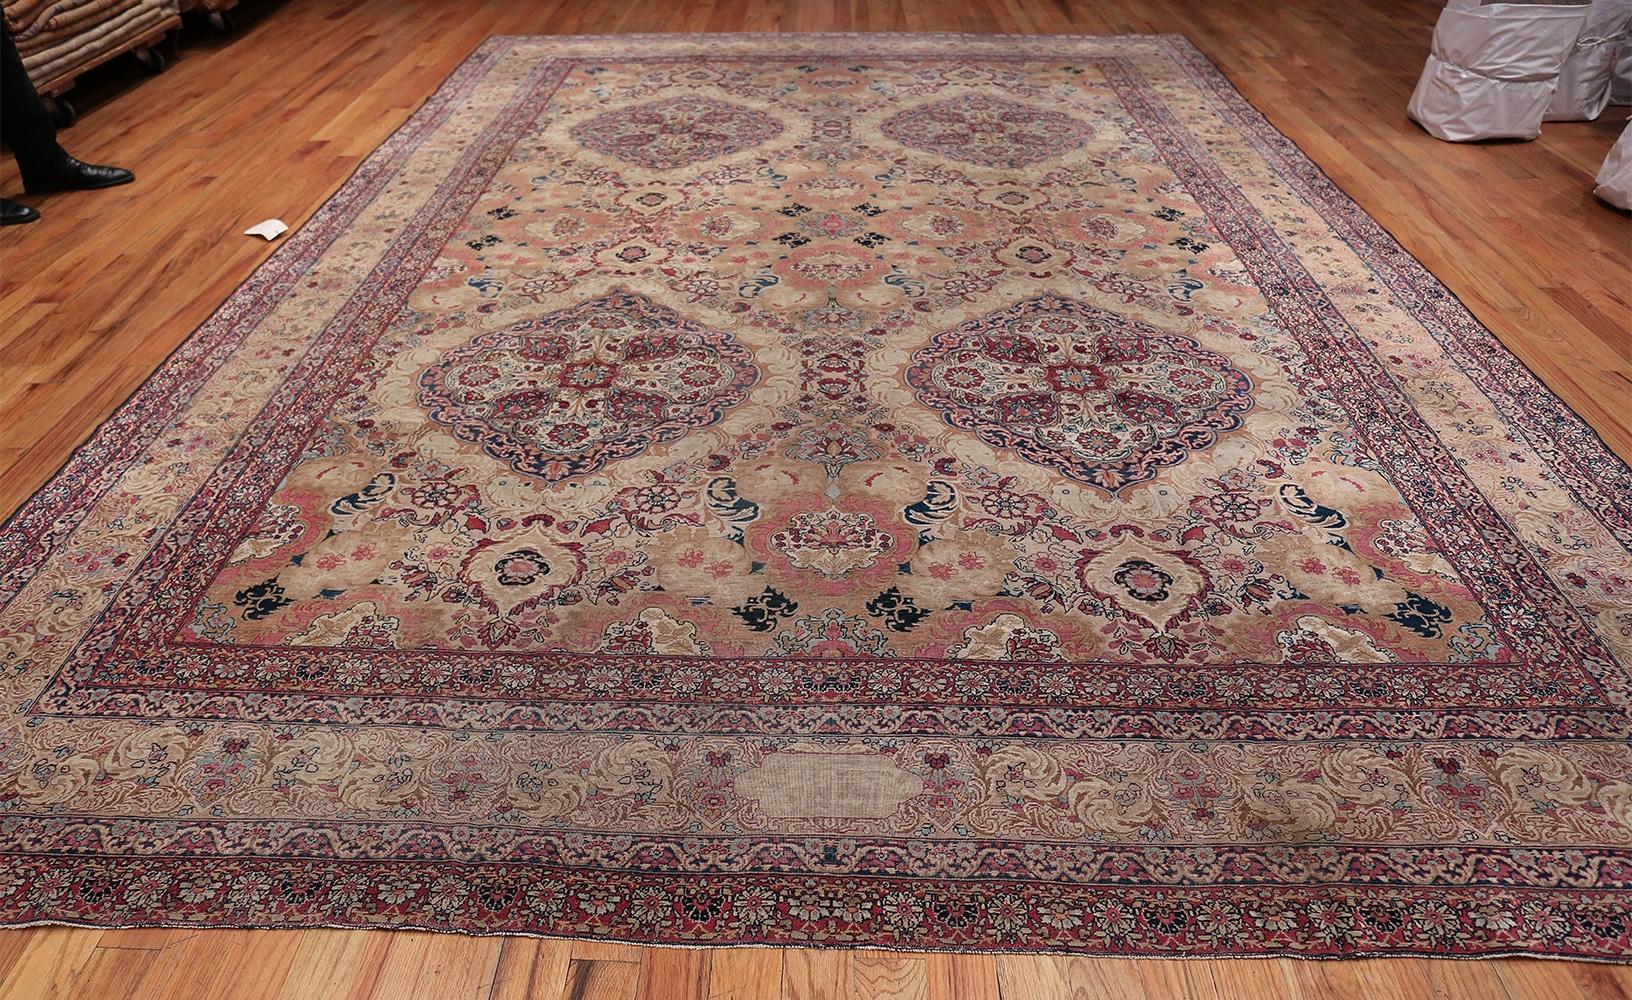 Antique Persian Kerman Lavar rug, country of origin: Persia, date circa late 19th century. Size: 10 ft x 14 ft 5 in (3.05 m x 4.39 m)

Kerman has a history of weaving fine rugs that goes back nearly 400 years. Its artisans were tasked with creating